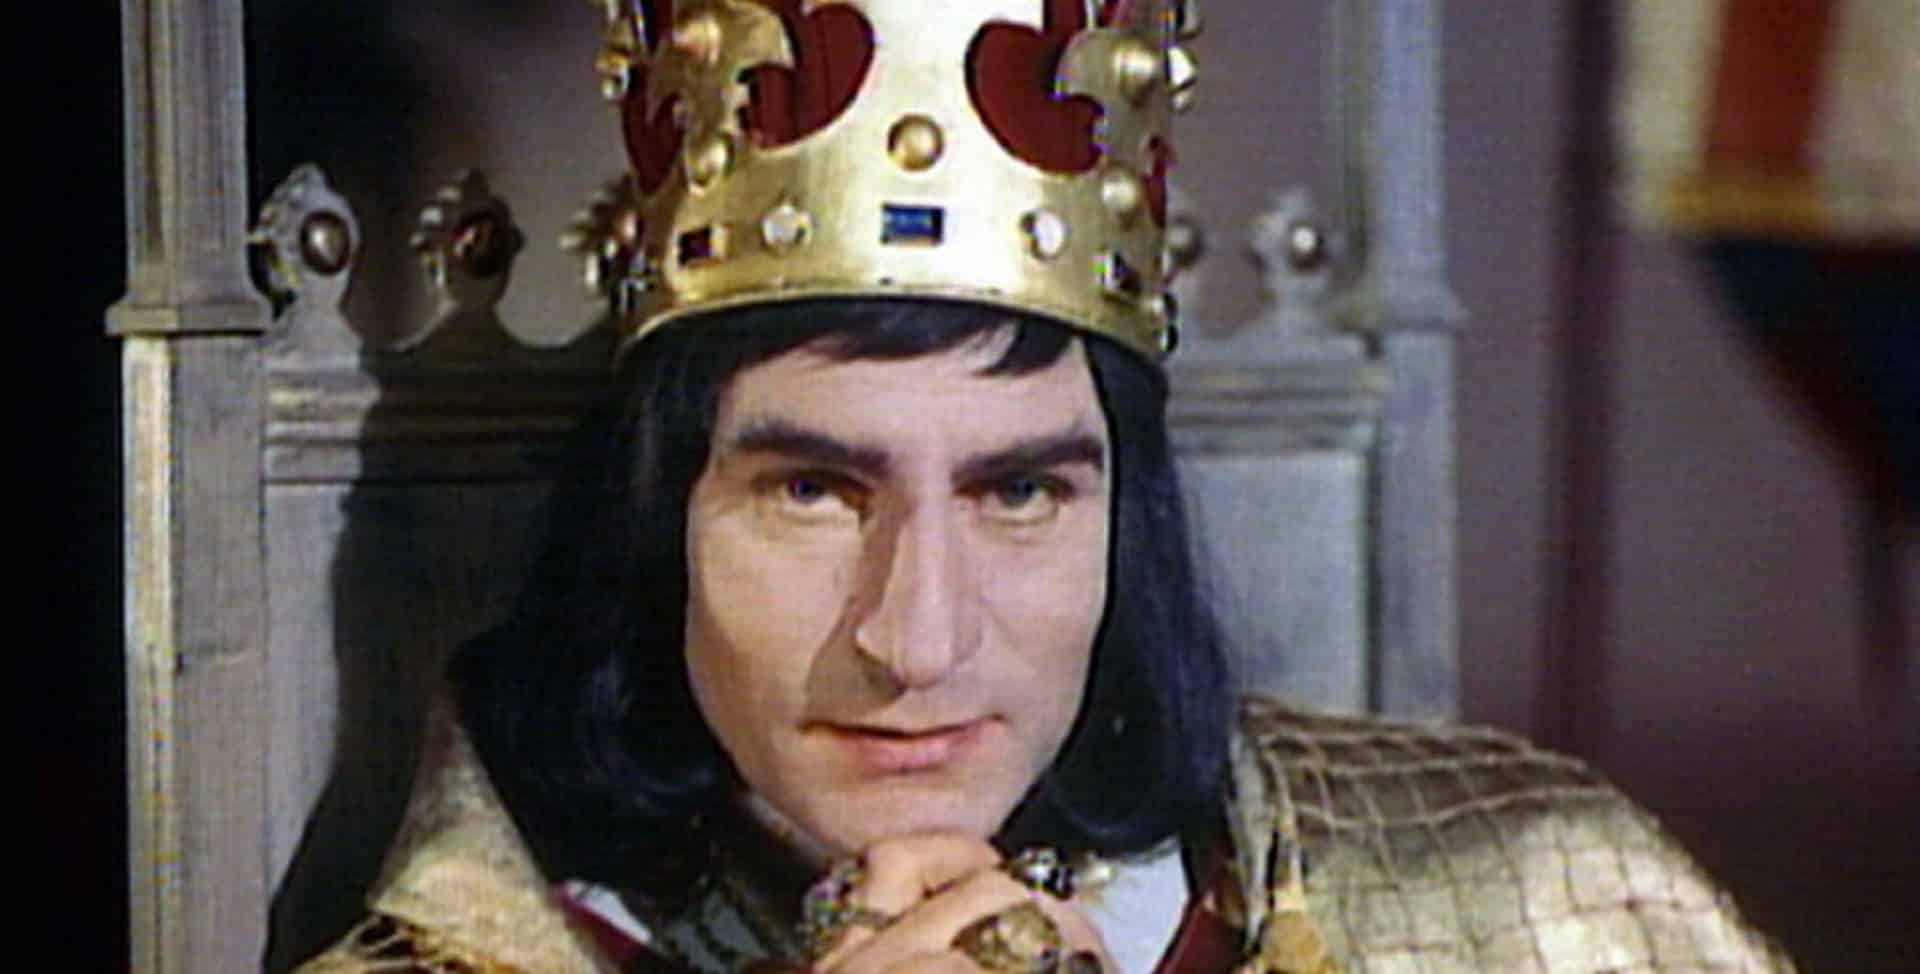 Richard III played by Lawrence Olivier